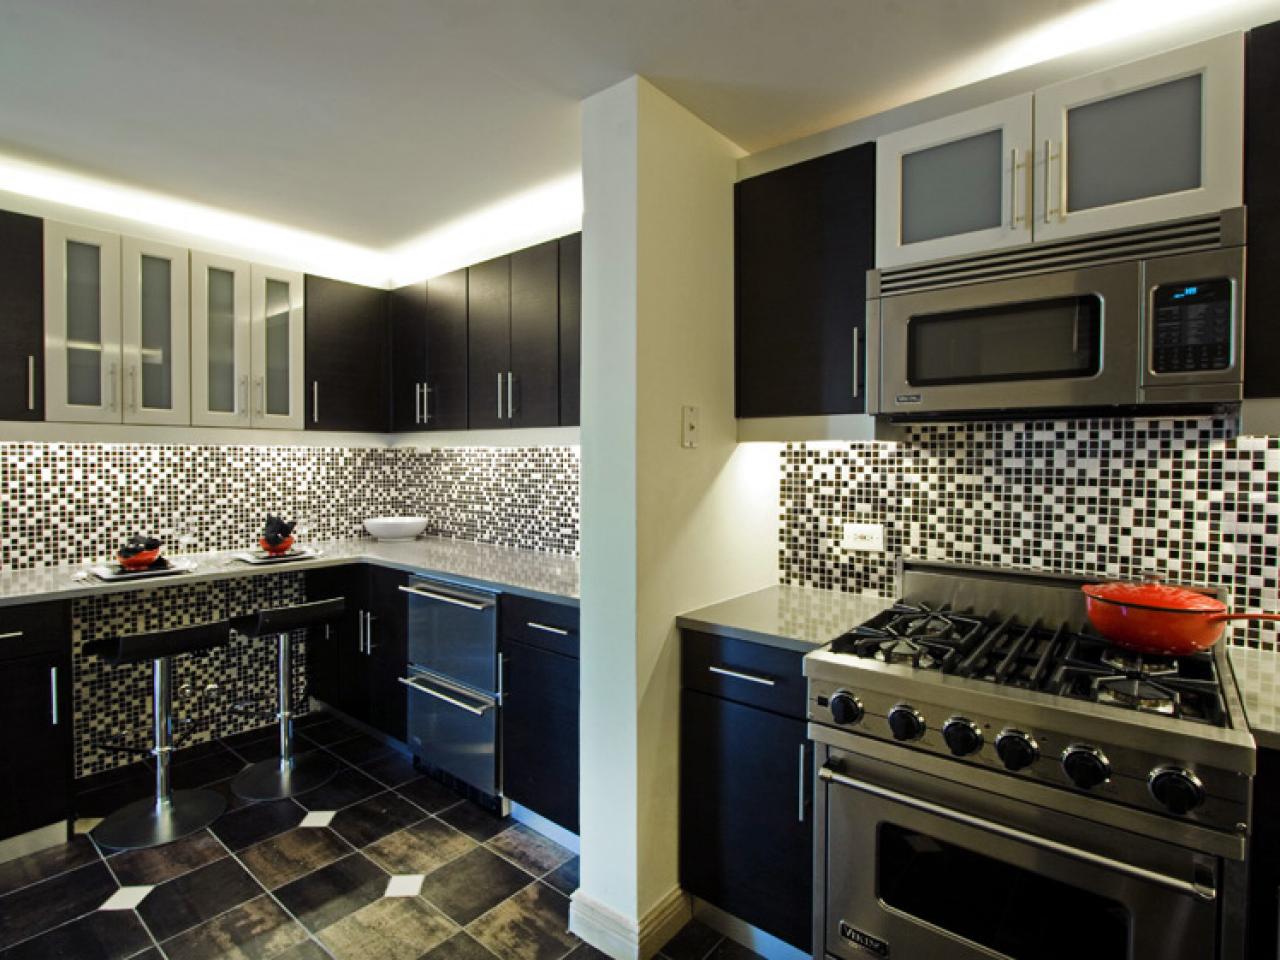 A black and white kitchen with kitchen cabinets and a stove.